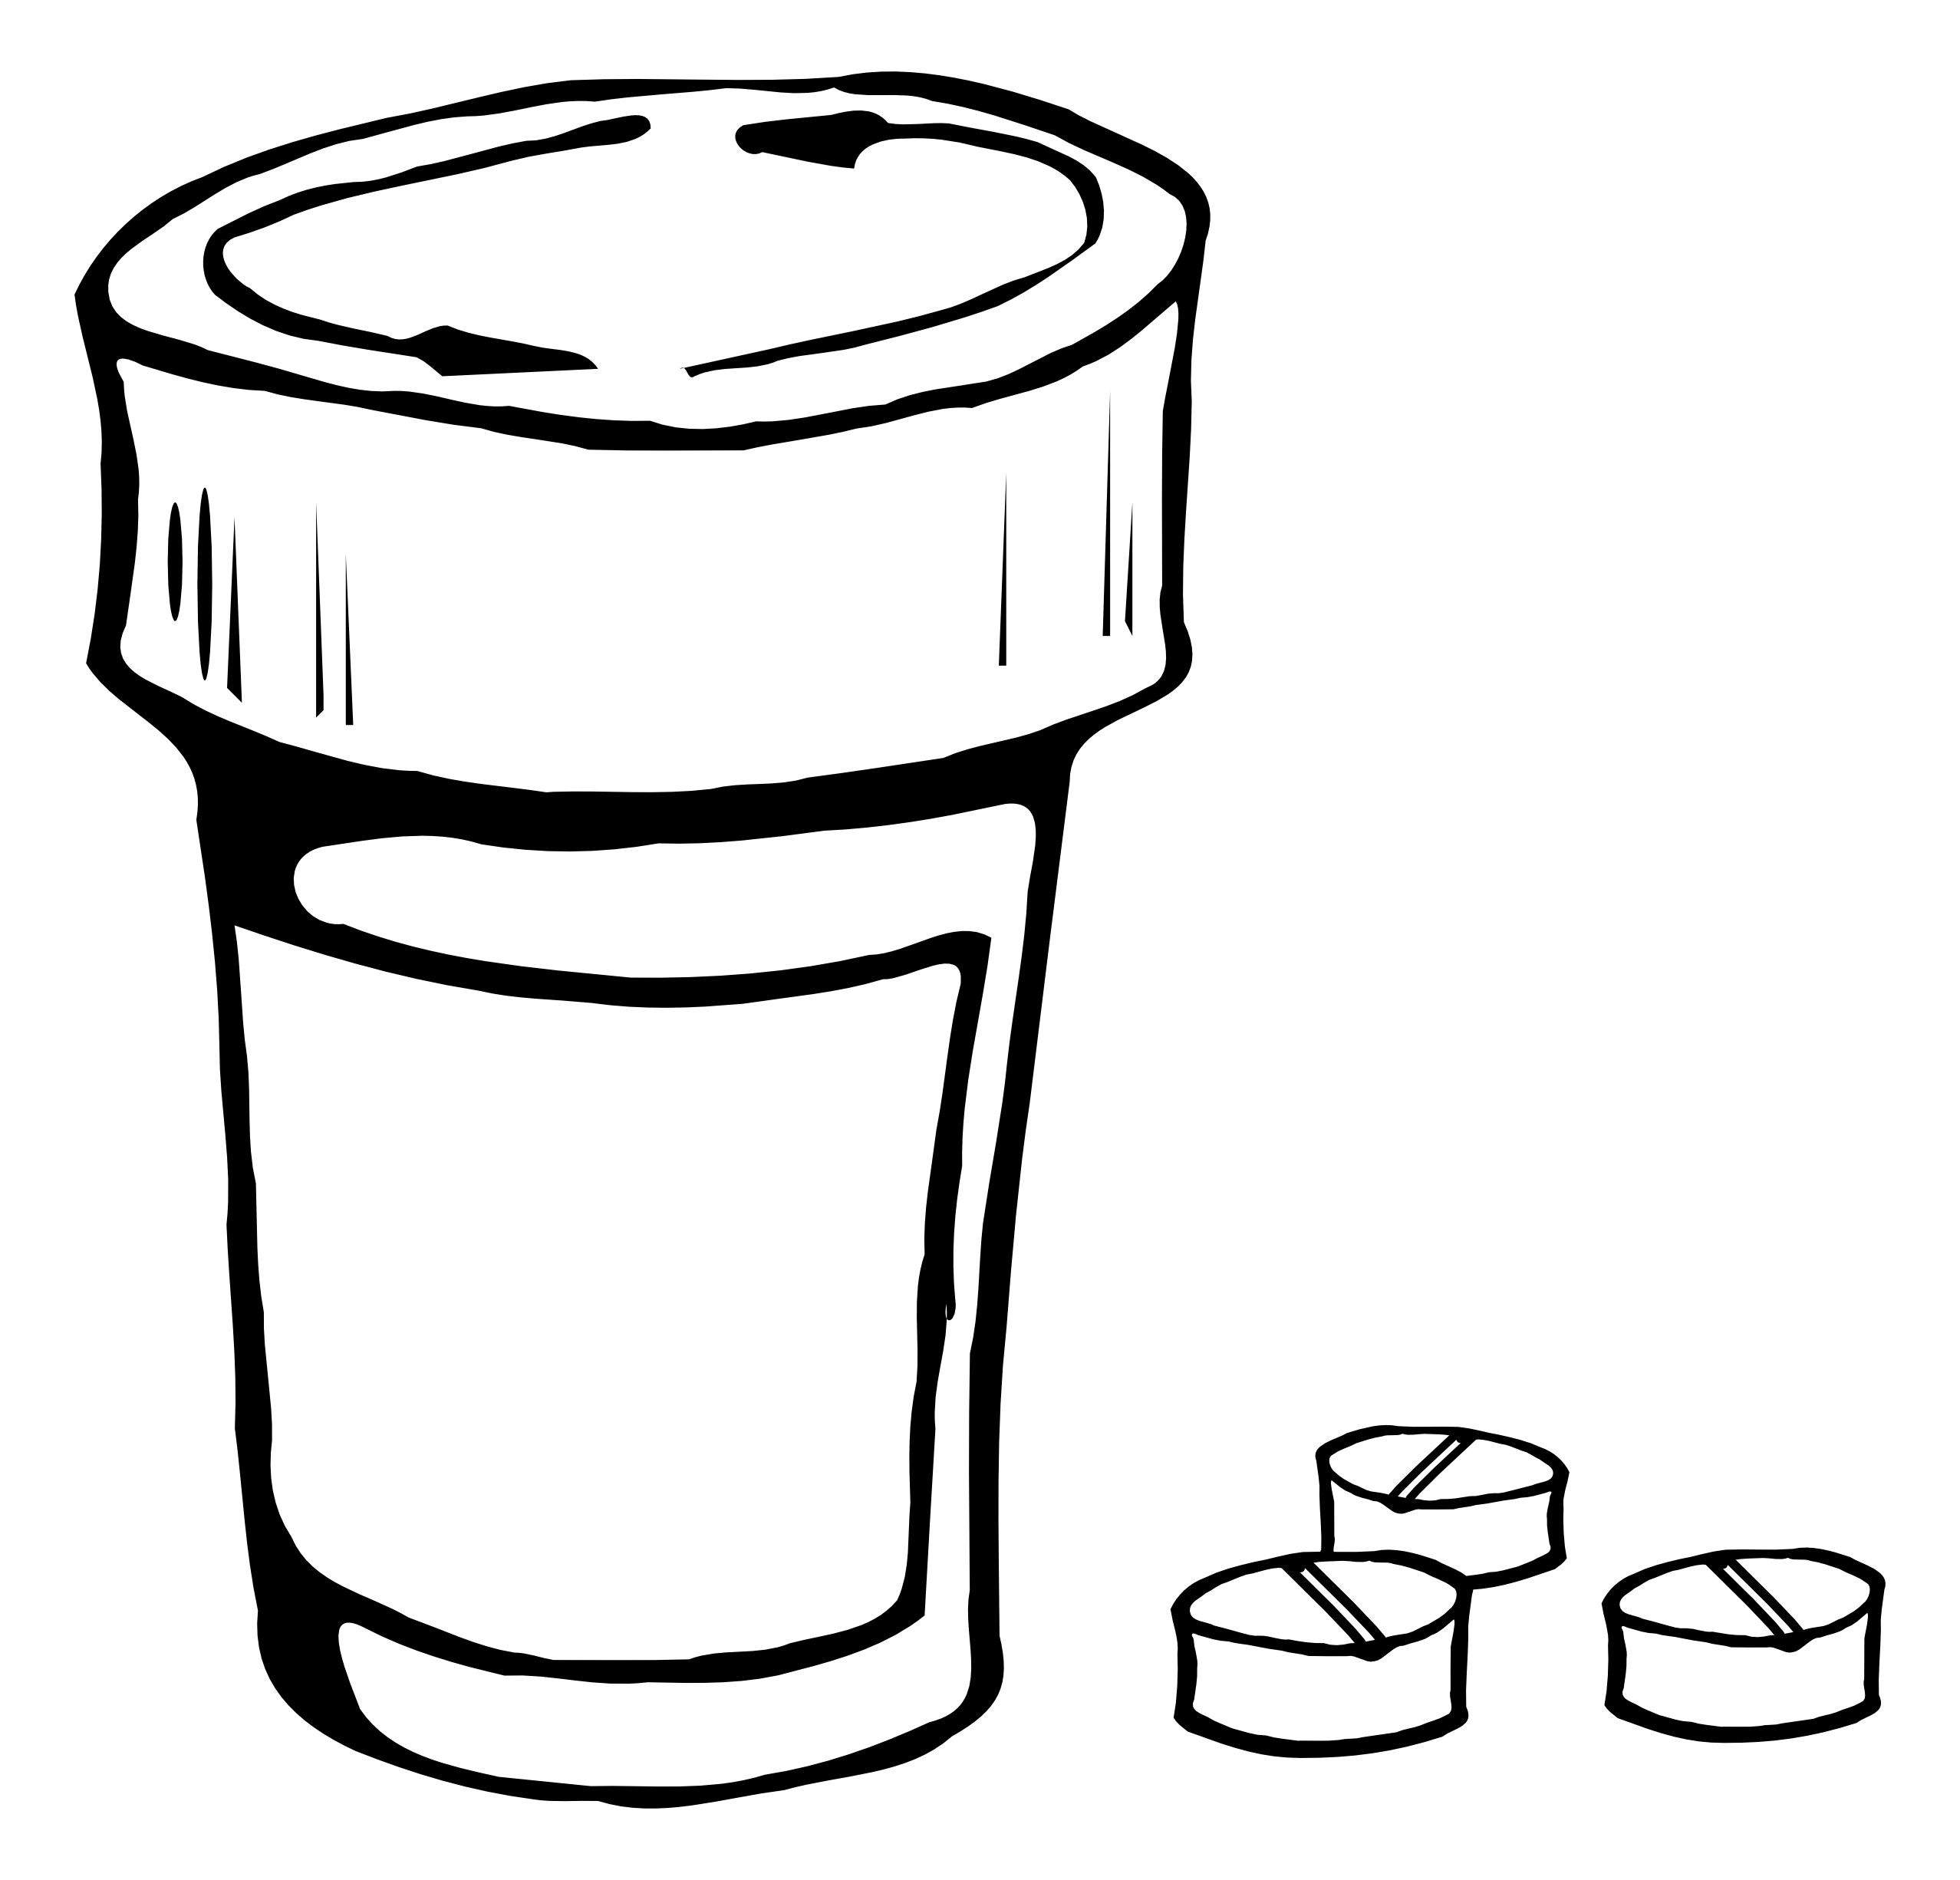 Medicine bottle coloring page. Pills clipart laxative